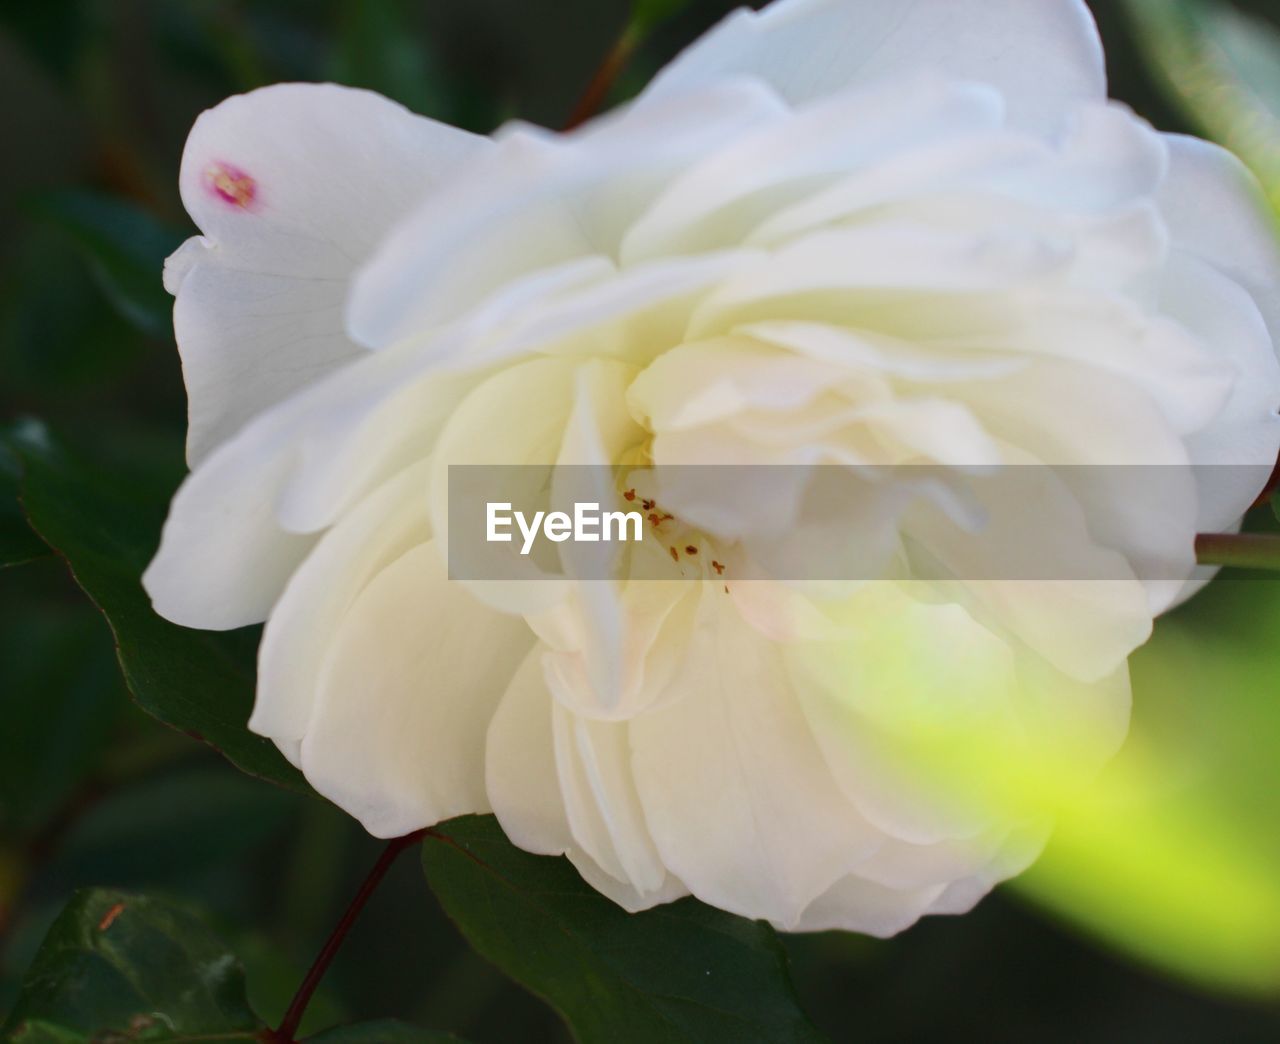 CLOSE-UP OF WHITE ROSE BLOOMING